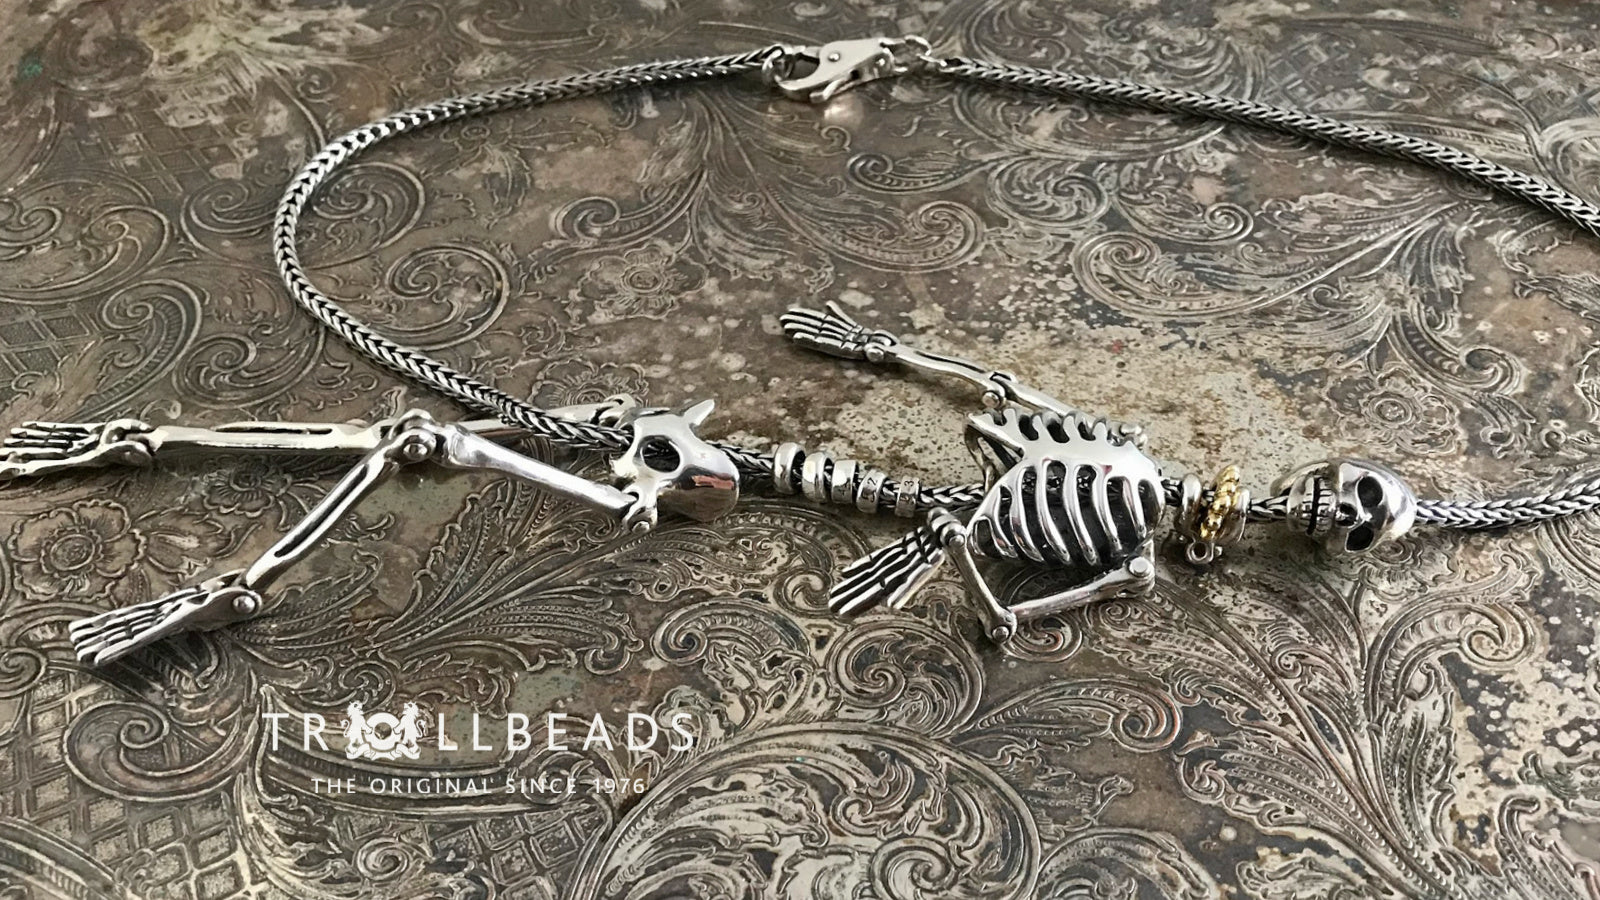 Suzie Q Studio has stashed away special glass, sterling silver and limited edition Trollbeads pieces in the Suzie Q Studio “Trollbeads Treasure Vault”. Here she tells us about the ultra-rare Trollbeads Skeleton Necklace.